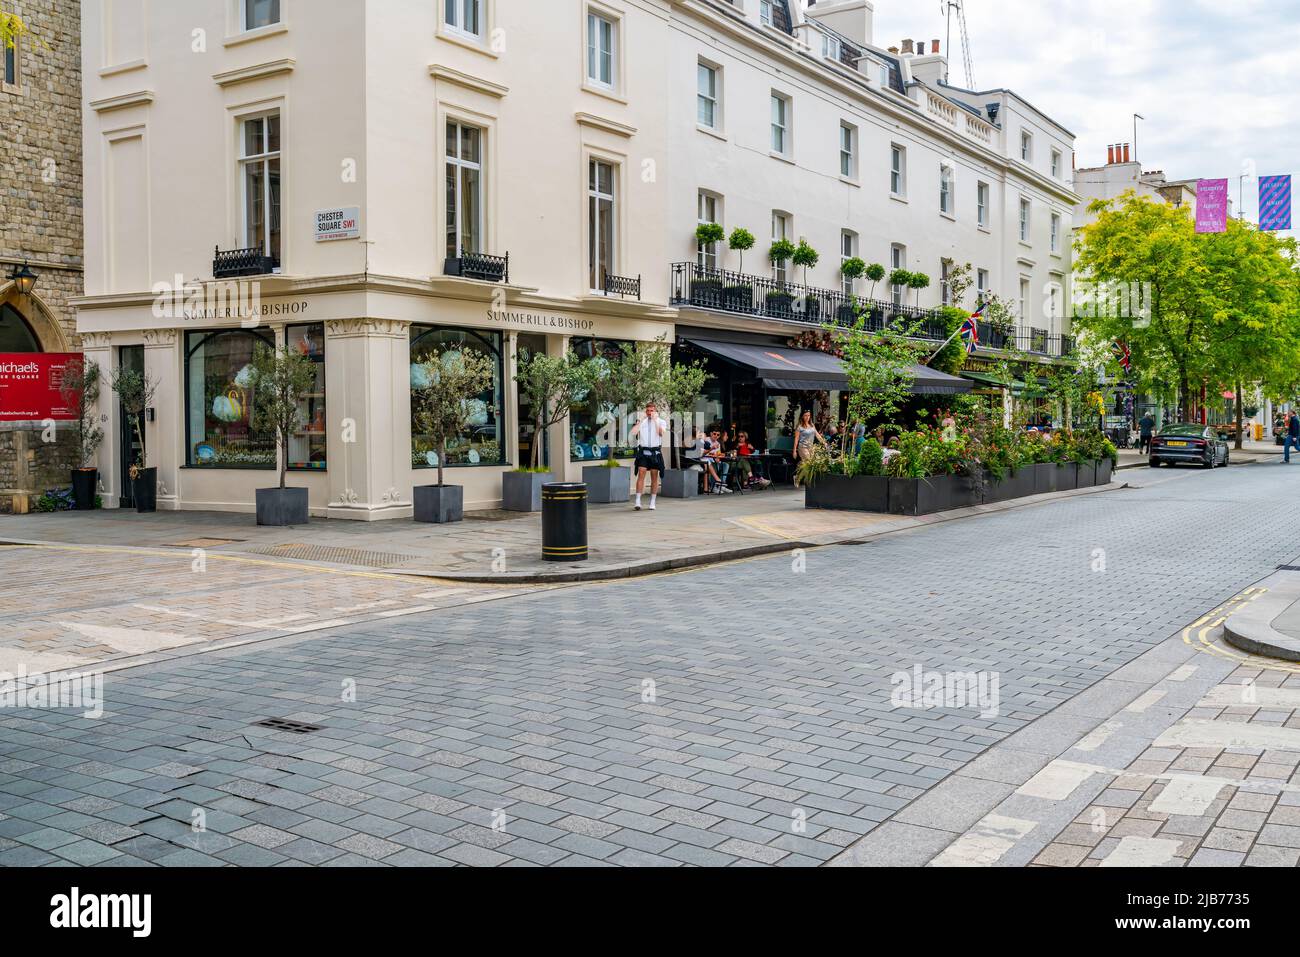 LONDON, UK - JUNE 03, 2022: Street view in Belgravia district, an affluent area known for the smart boutiques and high-end restaurants Stock Photo